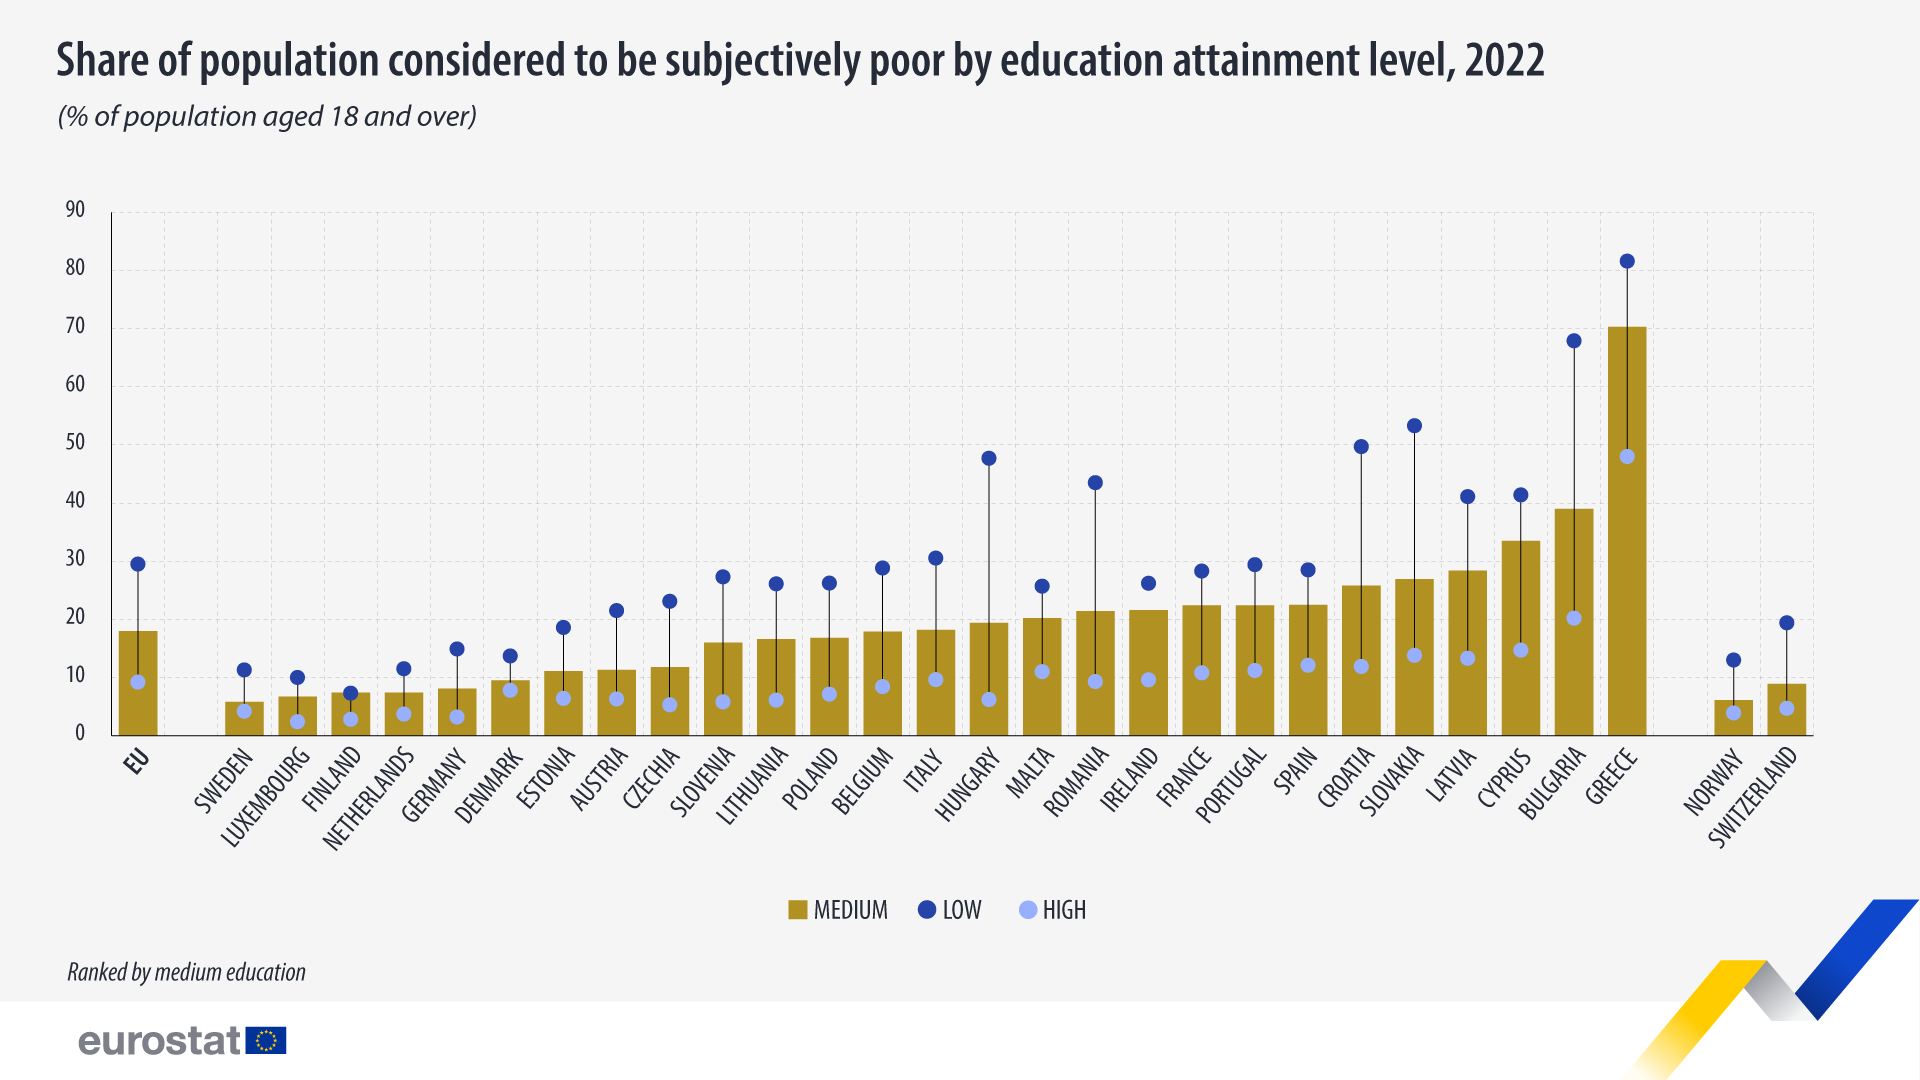 Chart showing share of population considered to be subjectively poor by education attainment level, 2022